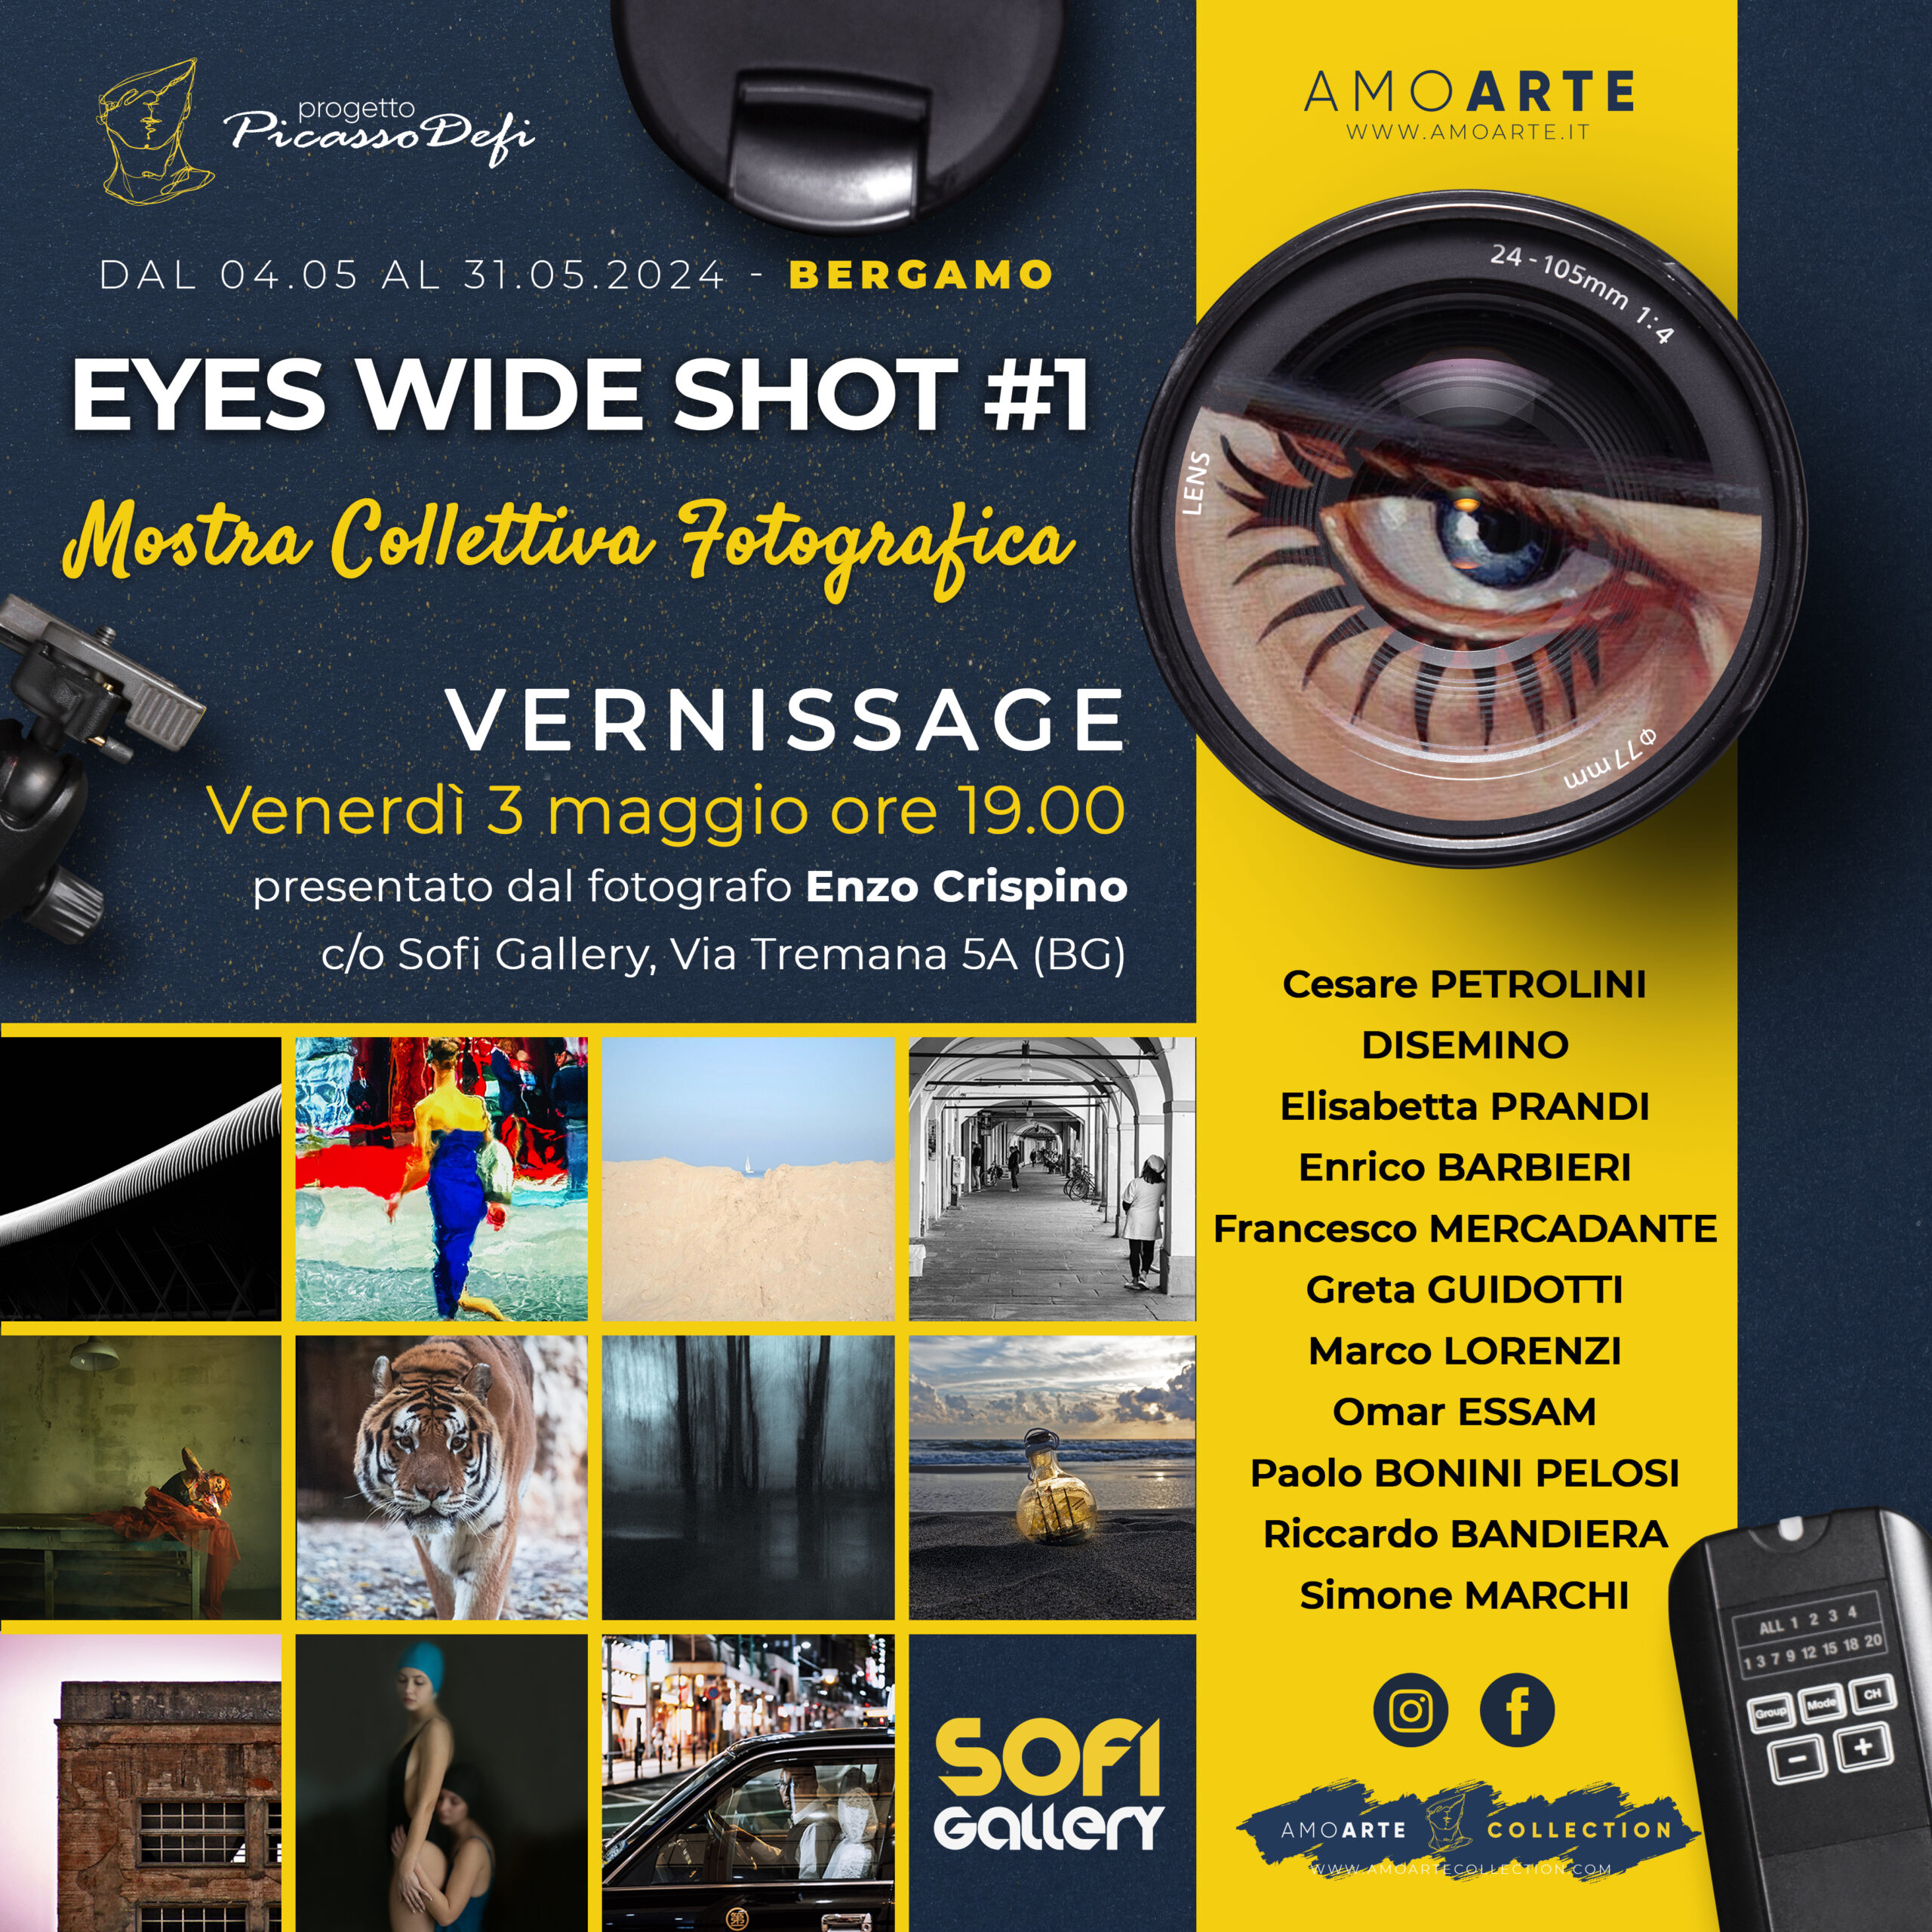 EYES WIDE SHOT #1: A Varied Vision of Contemporary Photography